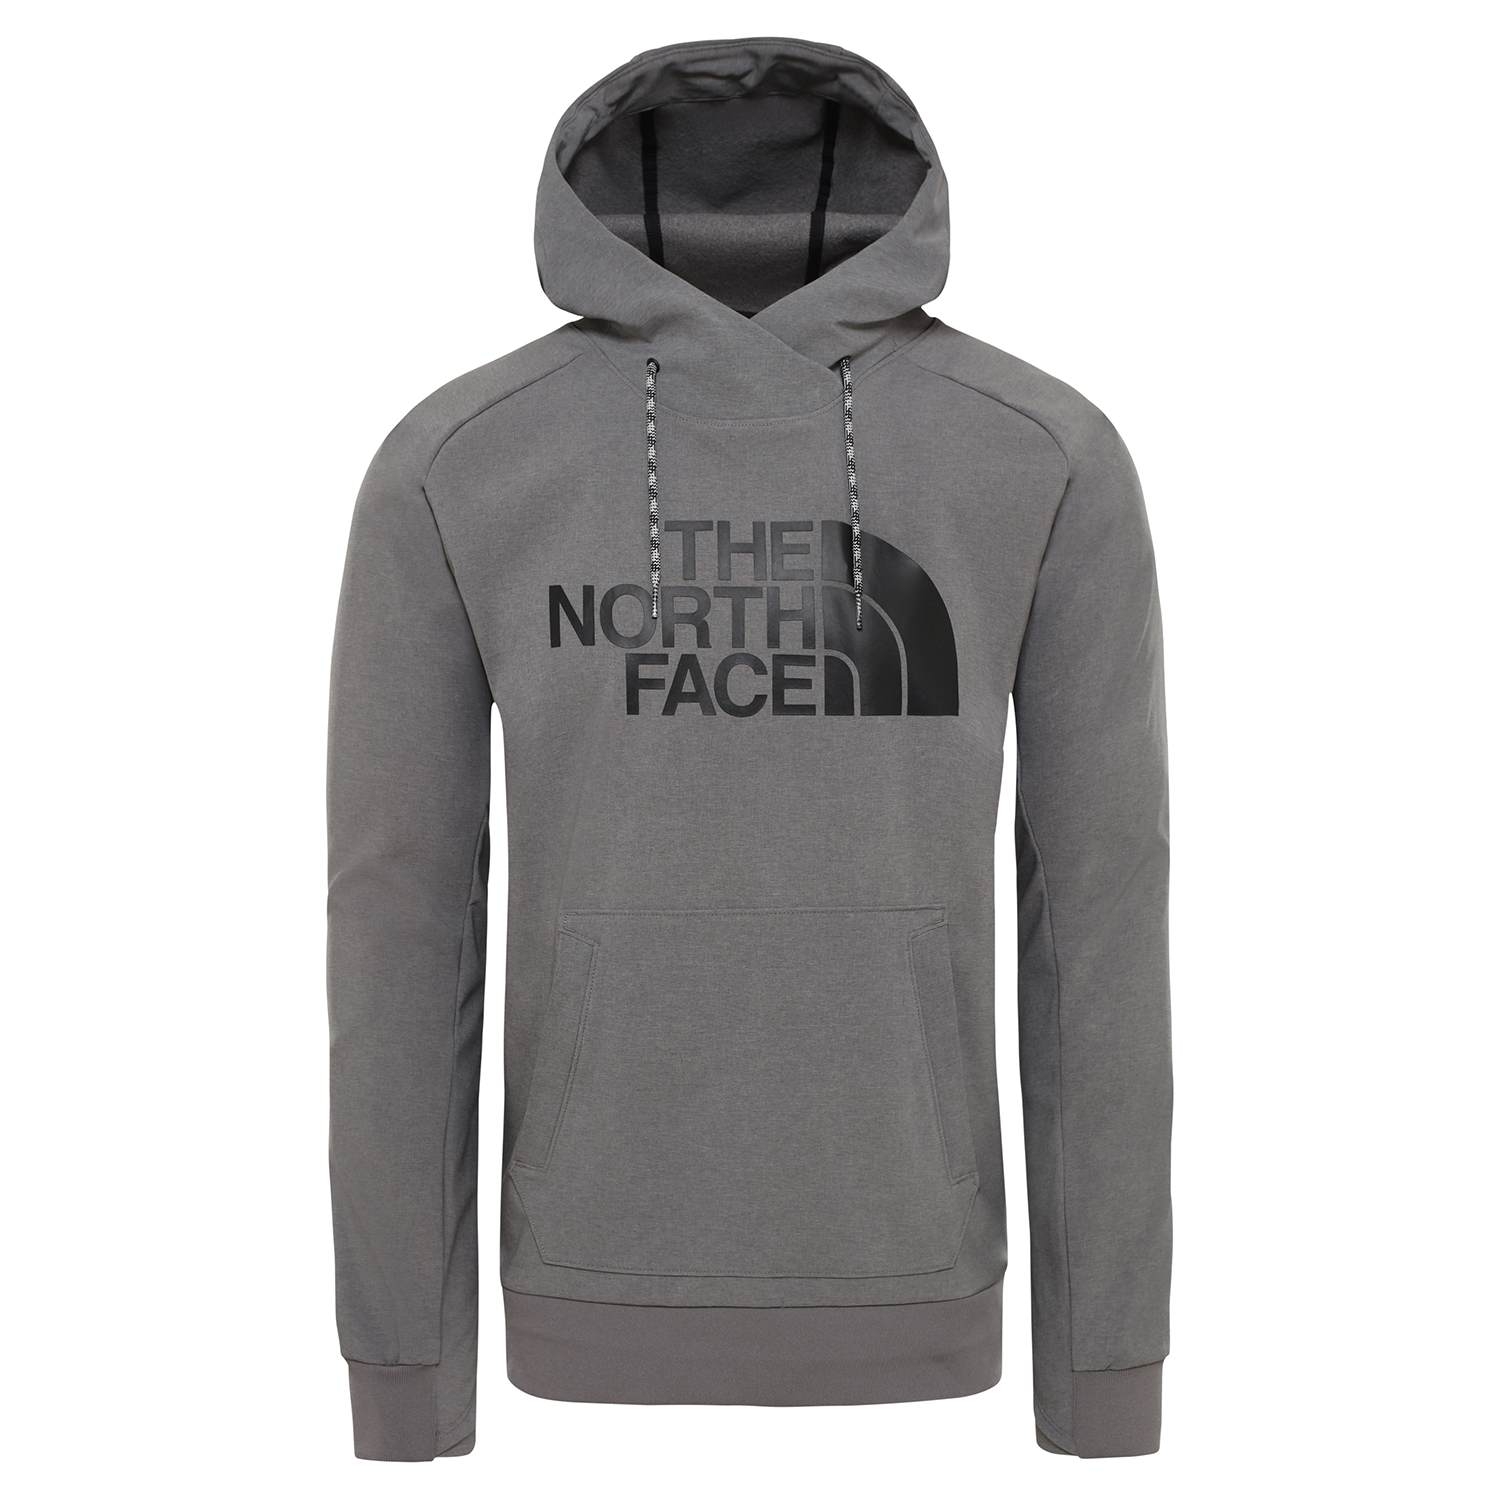 North Face Logo Hoodie 2020 | North Face | Hoodies | Snowtrax